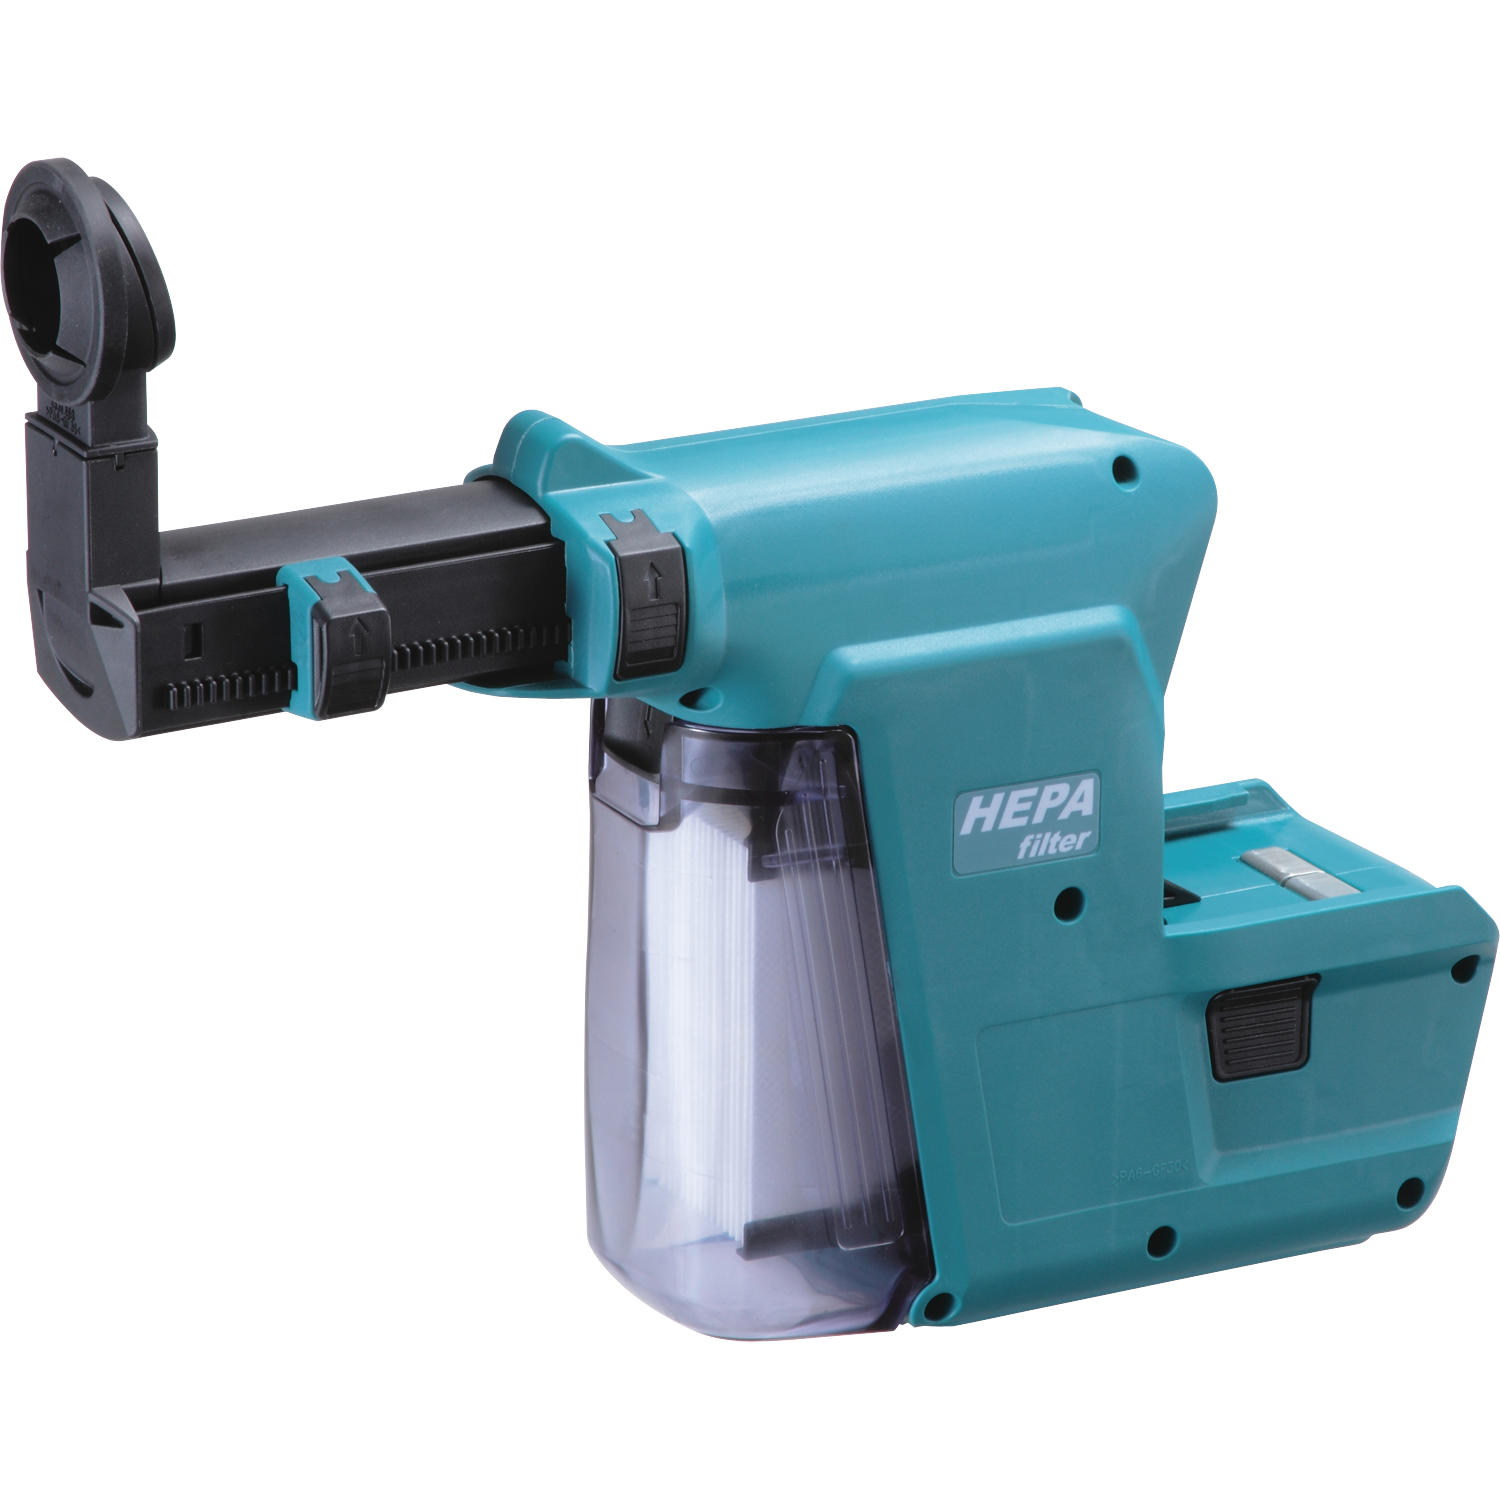 Makita Dust Extractor Attachment 193472-7 Z244 for sale online 